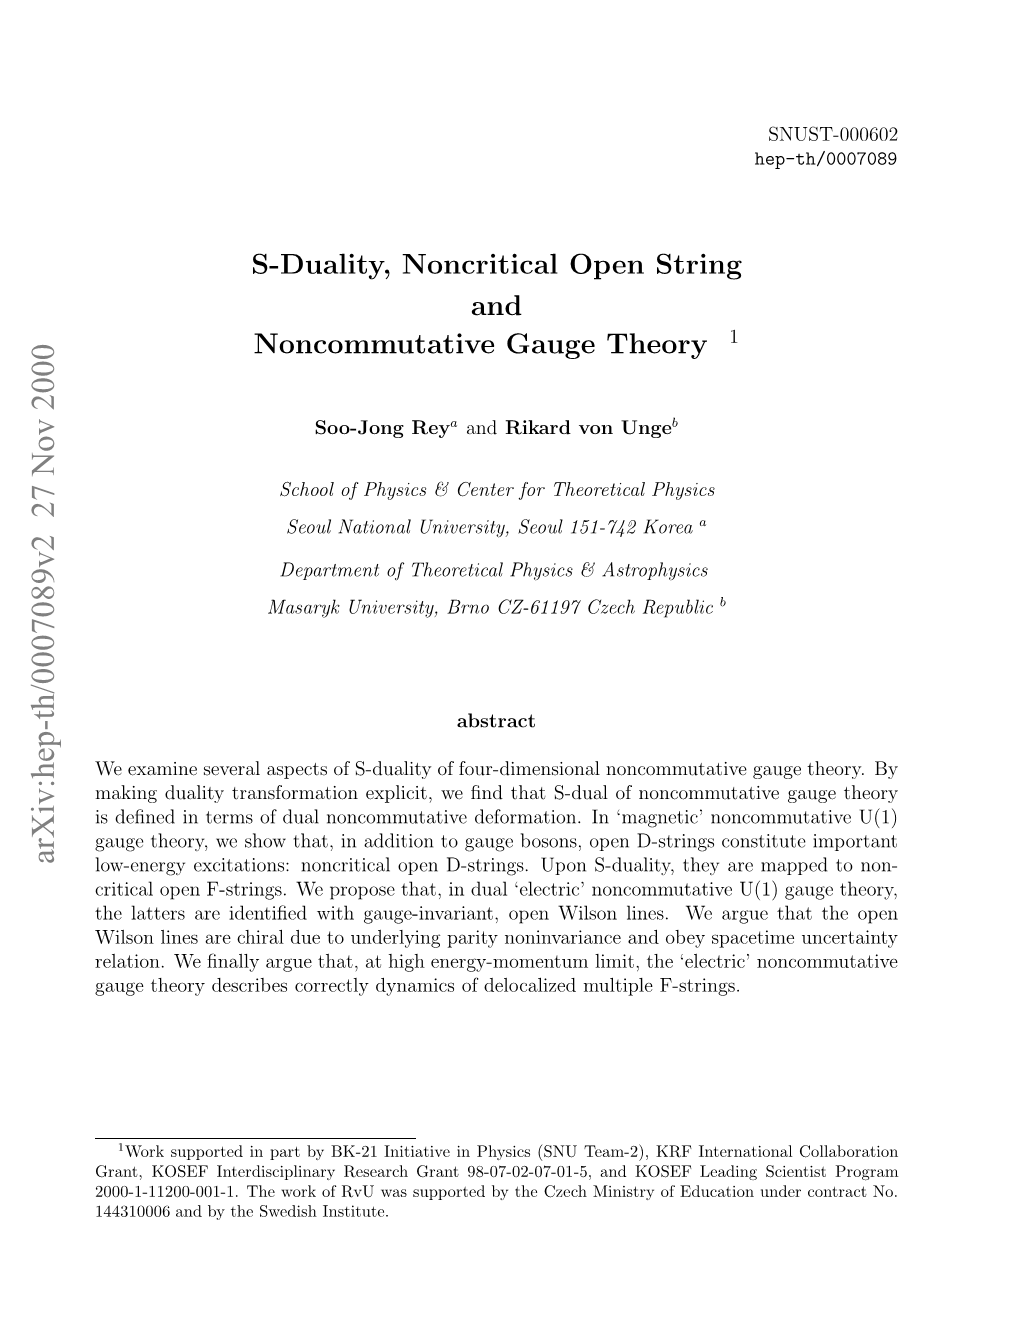 S-Duality, Noncritical Open String and Noncommutative Gauge Theory